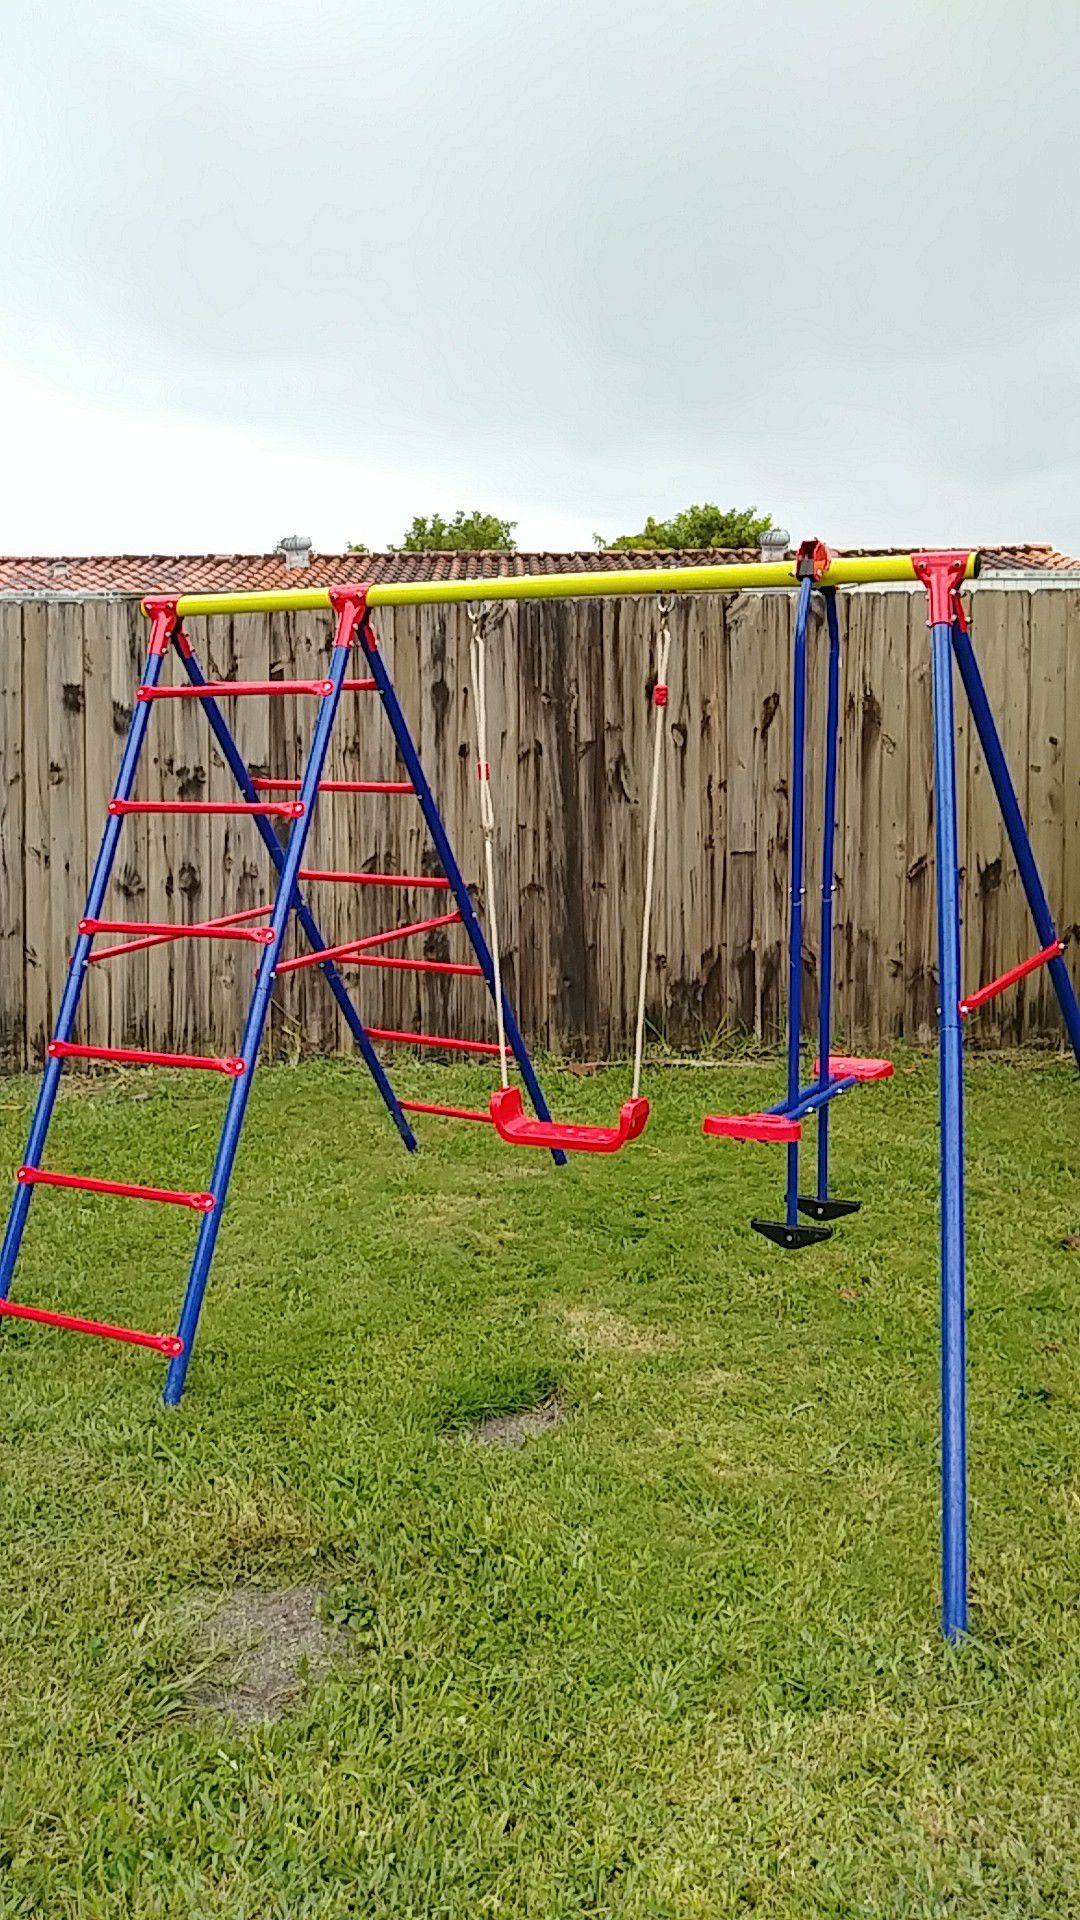 Swing set. Almost new. Used only 3 or 4 times